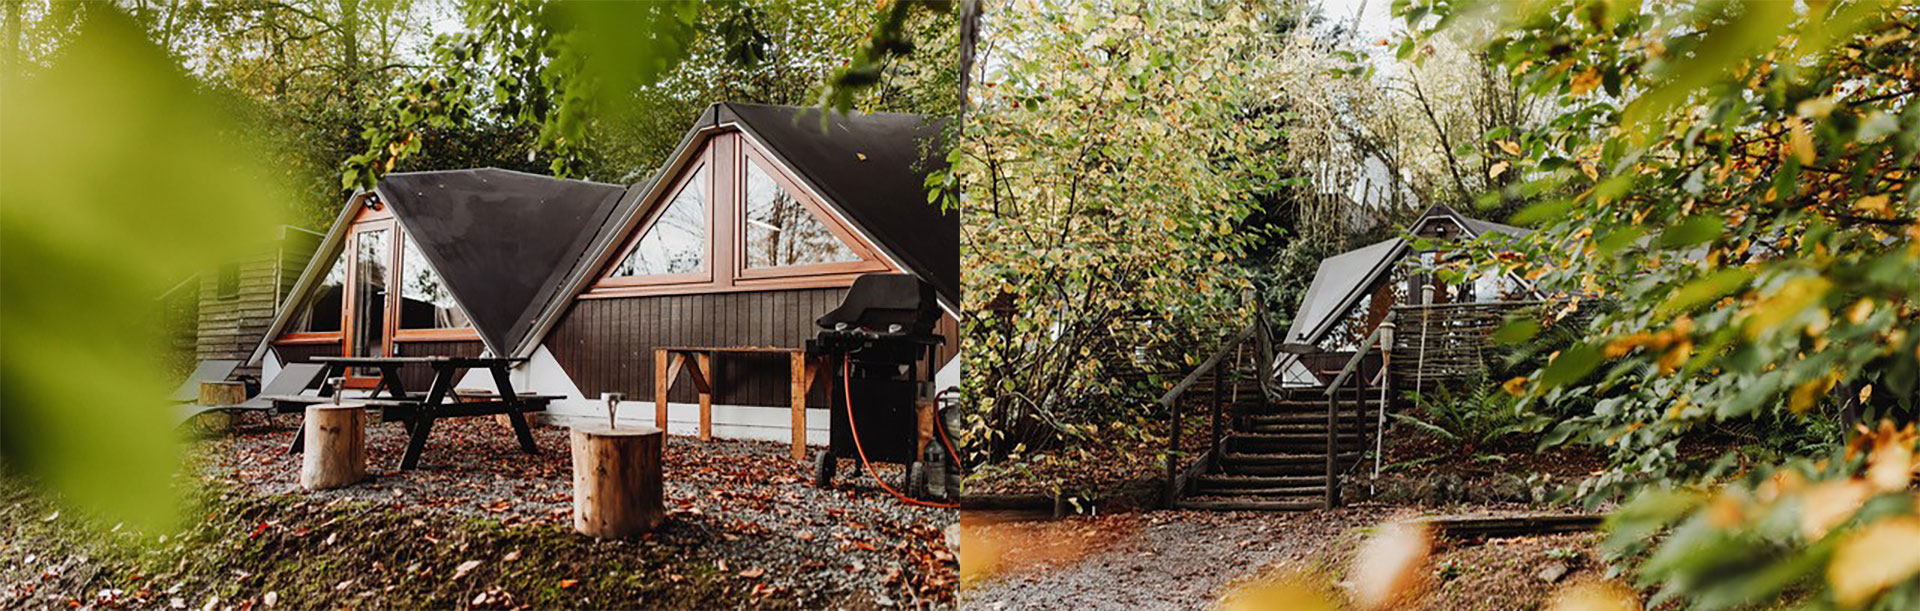 Maison d'hôtes - Gesves - At Home In the Woods